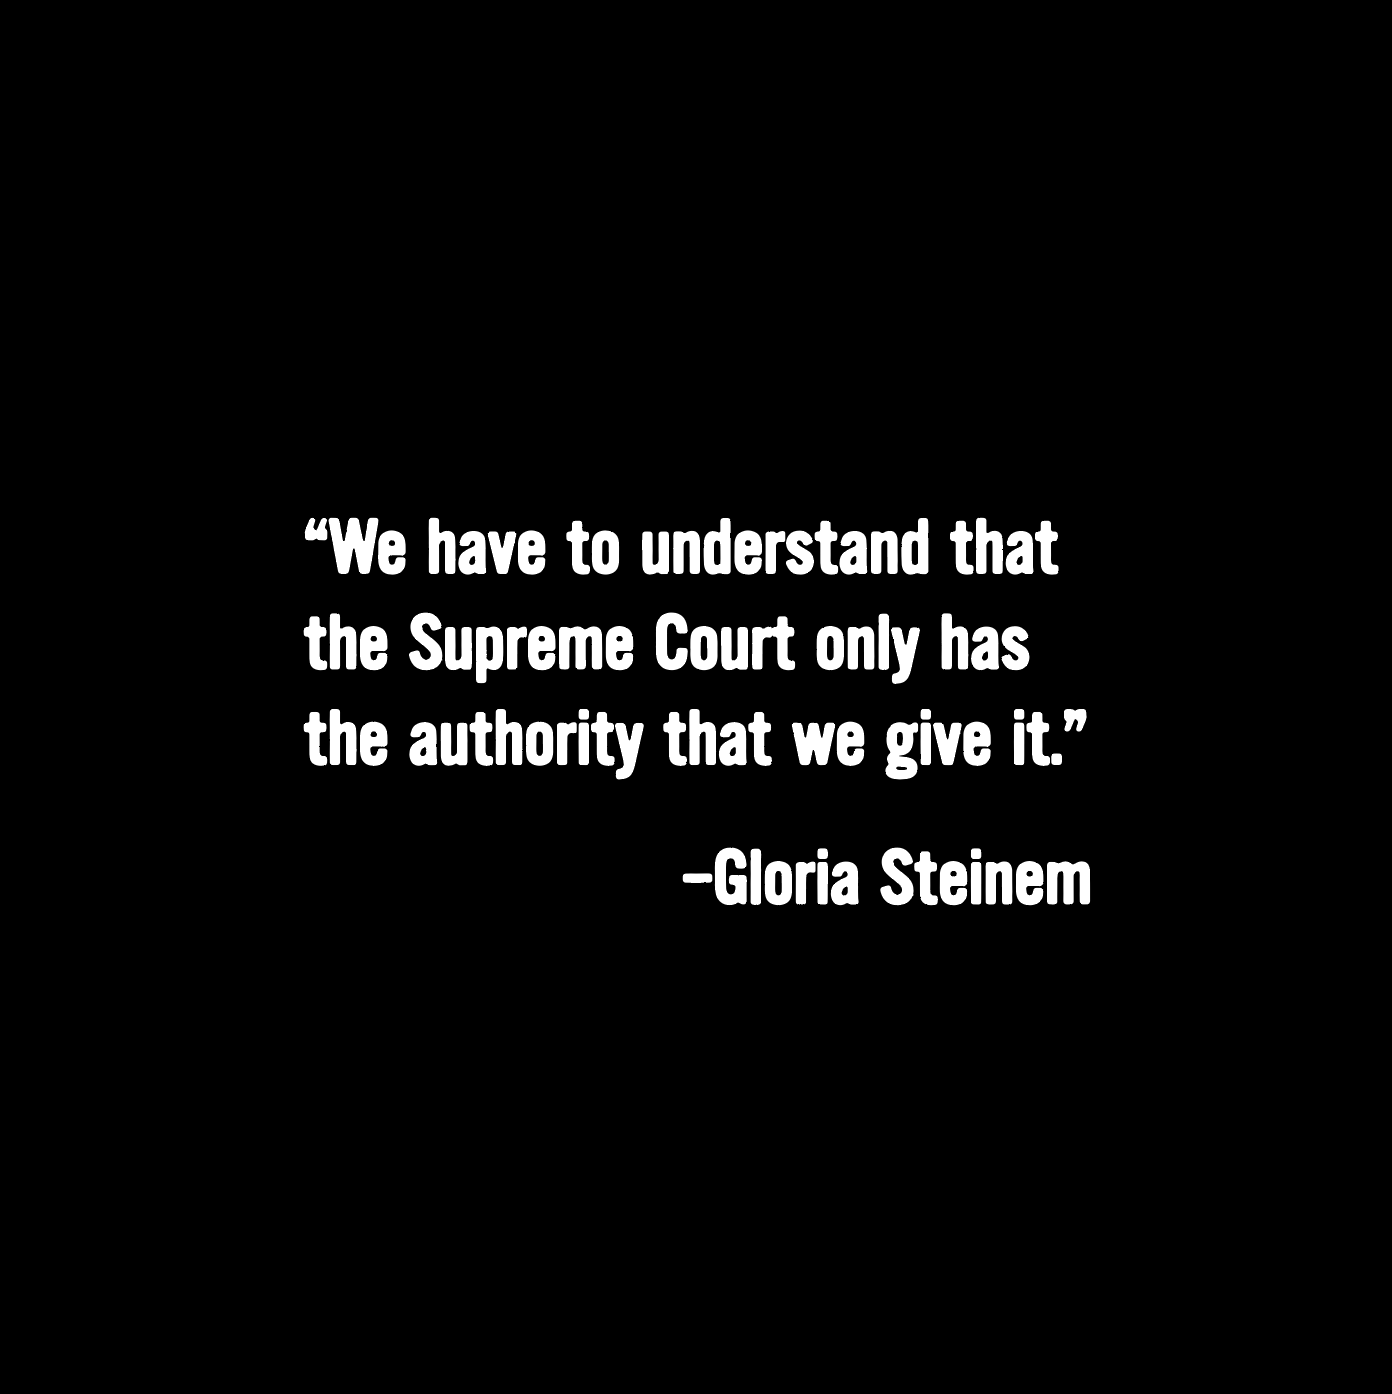 Front design of the SCOTUS Jenga Unisex Tee. A quote from Gloria Steinem that says "We have to understand that the Supreme Court only has the authority that we give it."